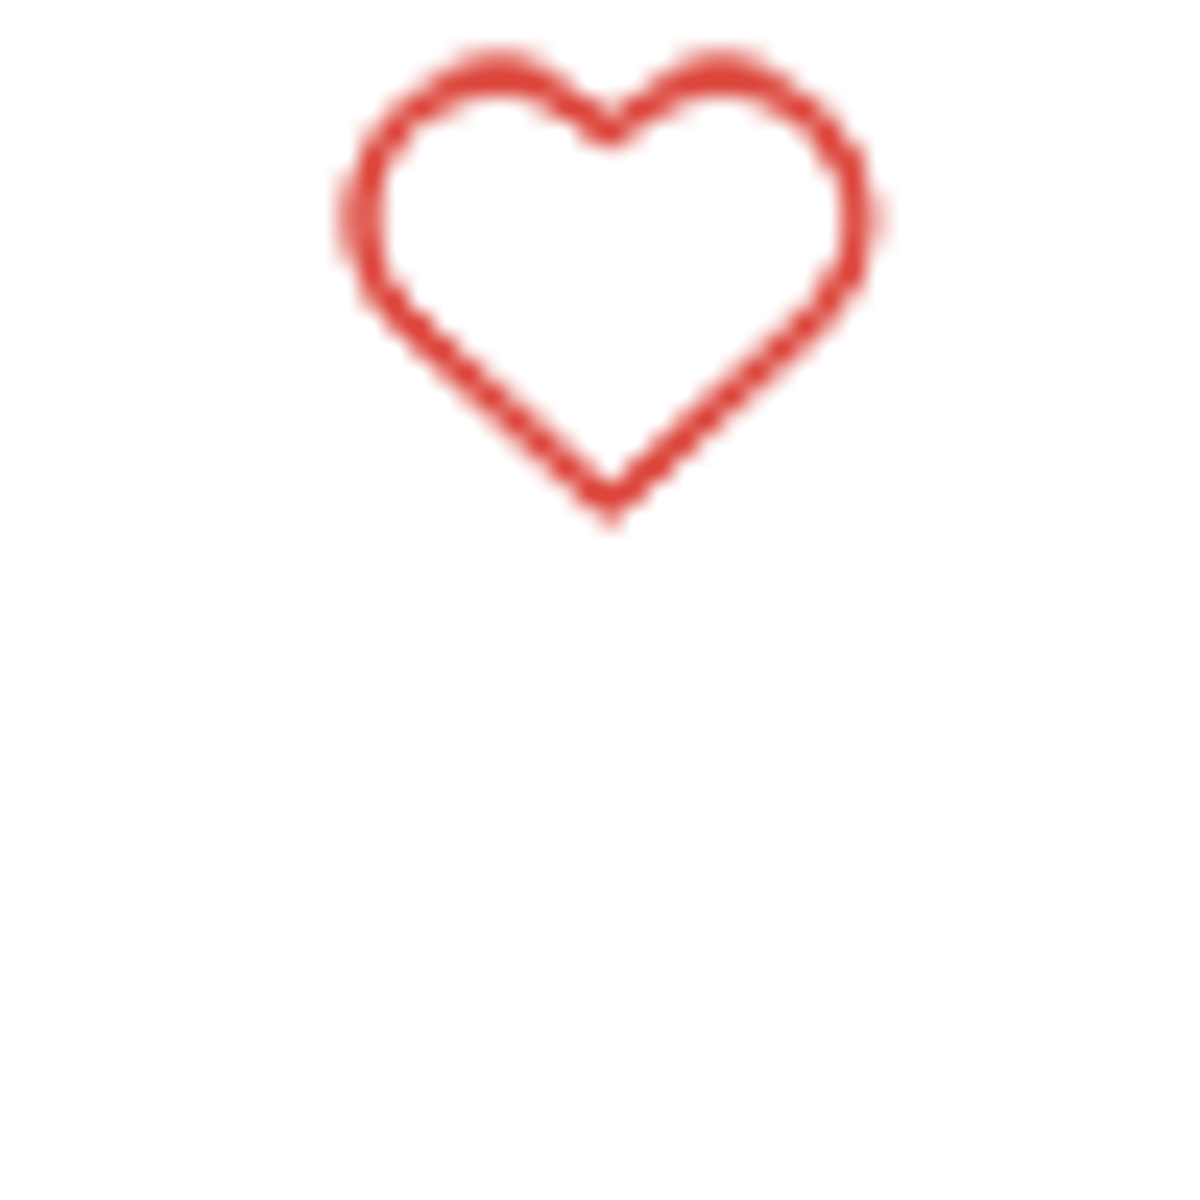 Hands out reaching a heart icon